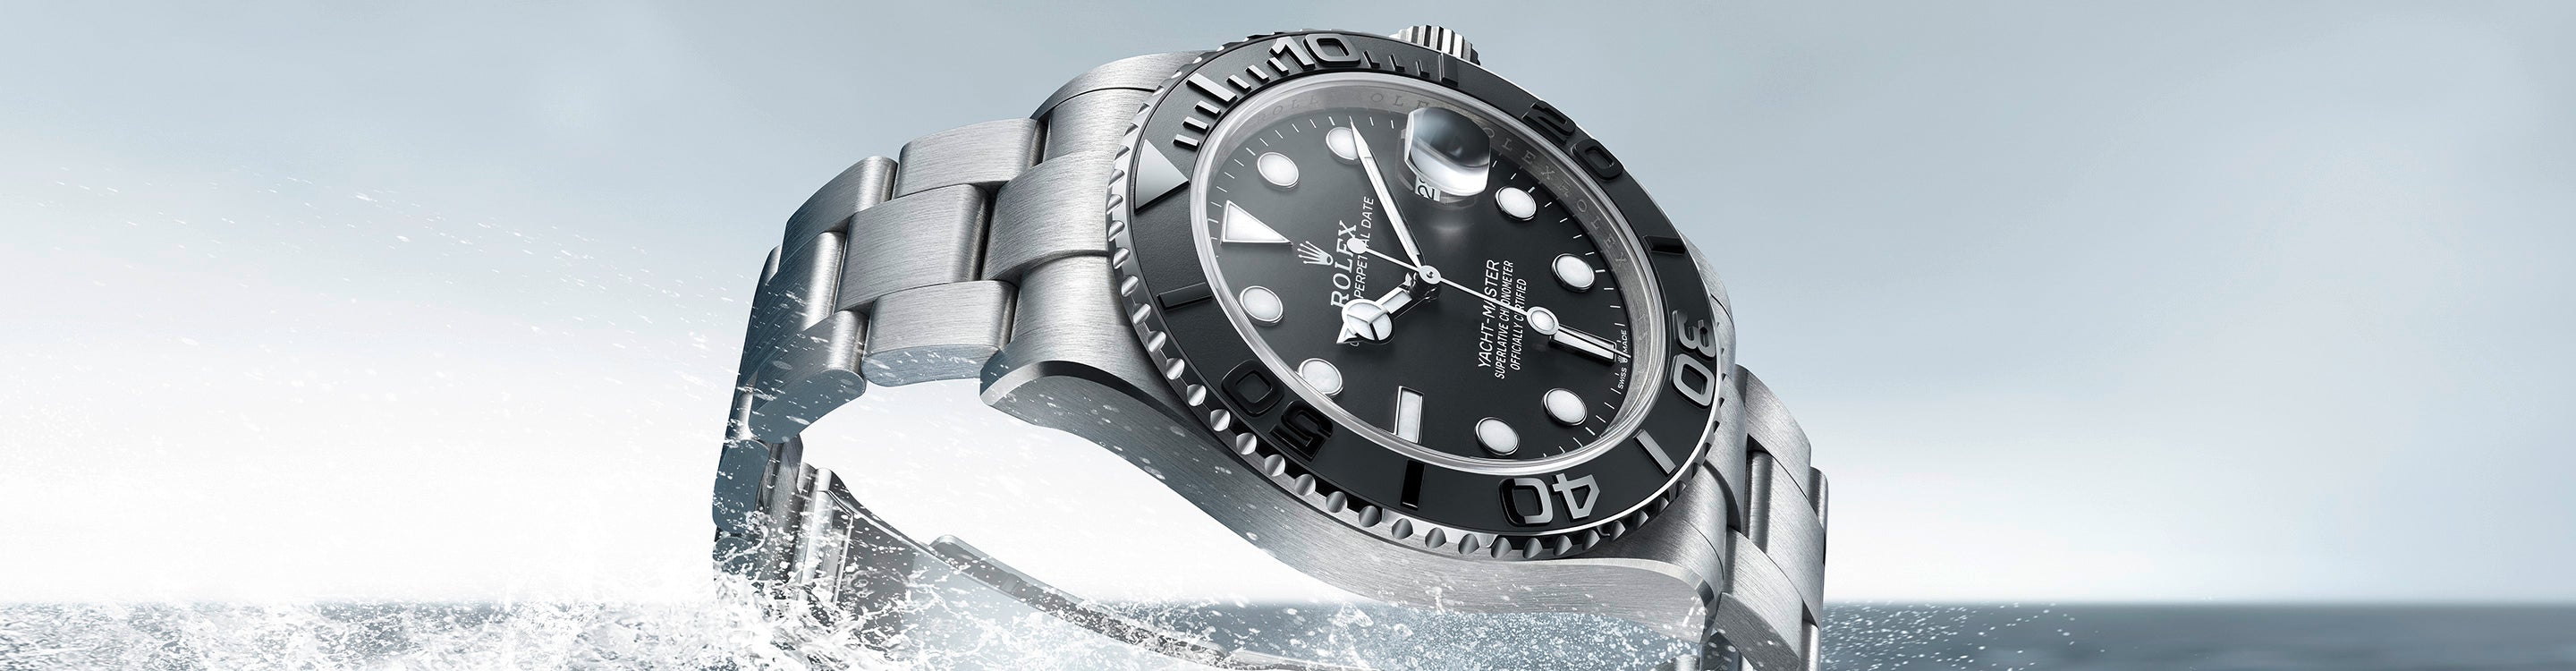 Rolex Yacht-Master II in Water at Fink's Jewelers